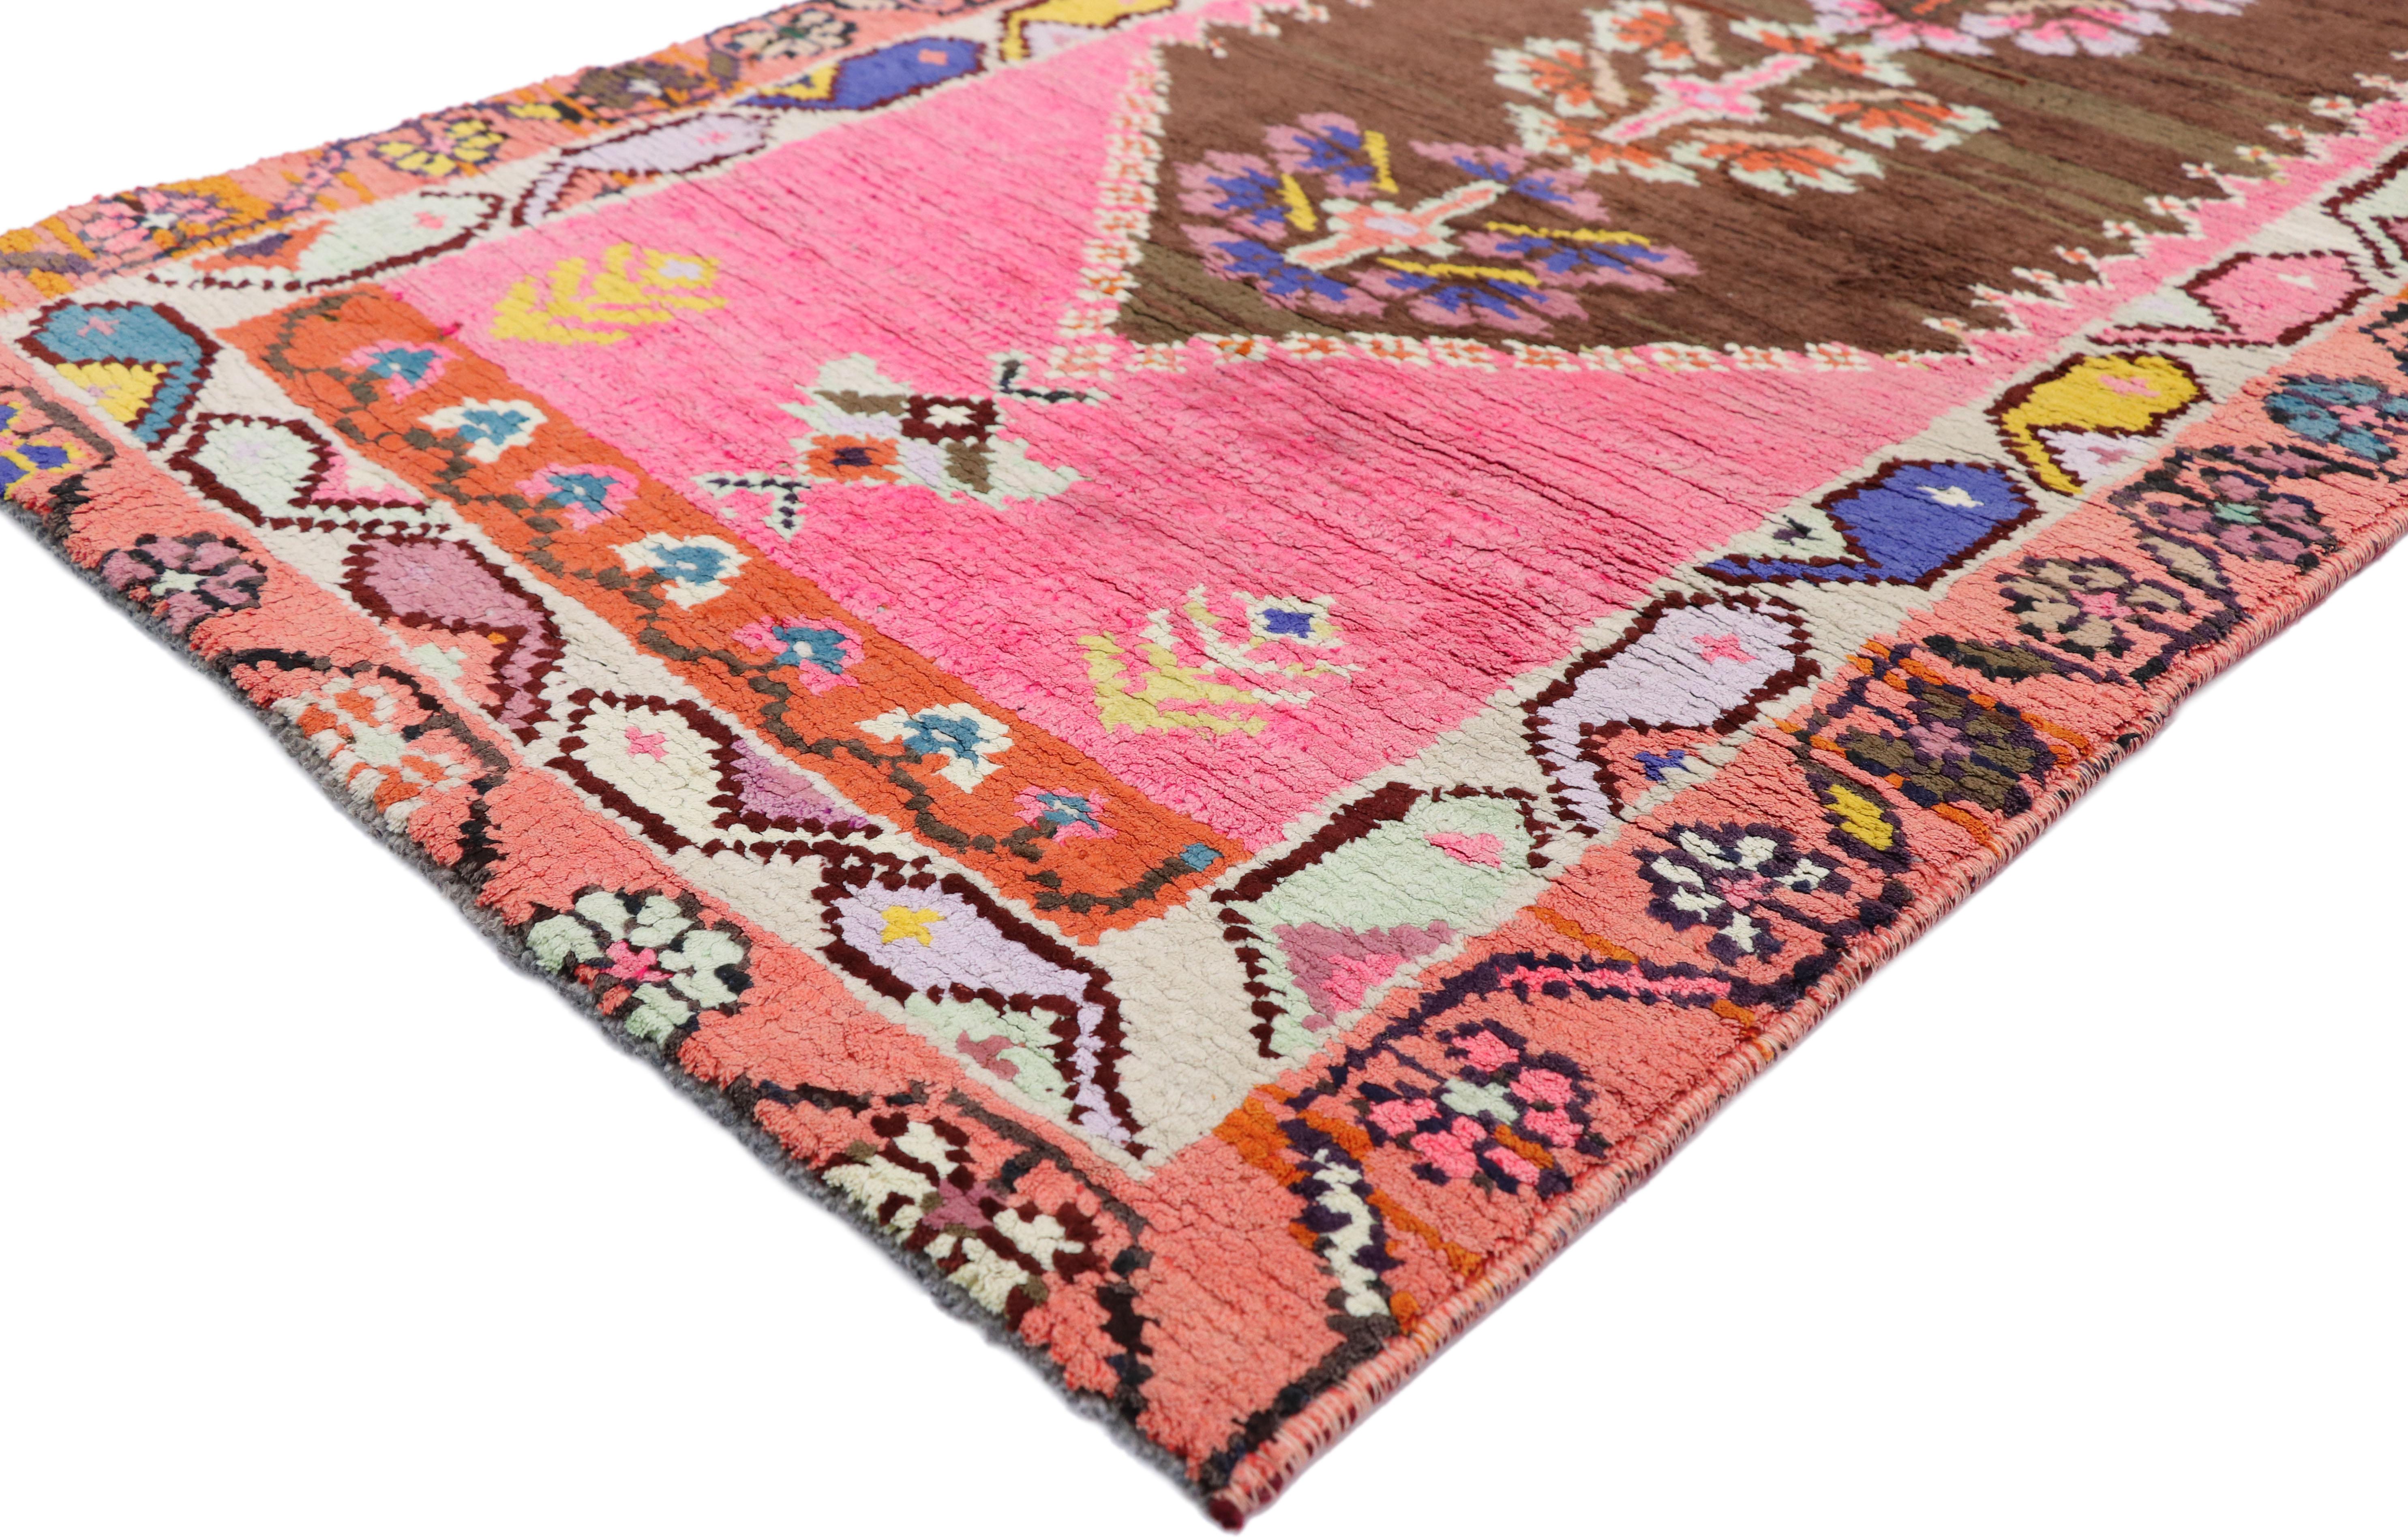 52662, vintage Turkish Oushak runner with eclectic Modern Mexican Frida Kahlo style. Drawing inspiration from Frida Kahlo and Modern Mexican style, this hand knotted wool vintage Turkish Oushak runner is eccentric, colorful, and exciting. The